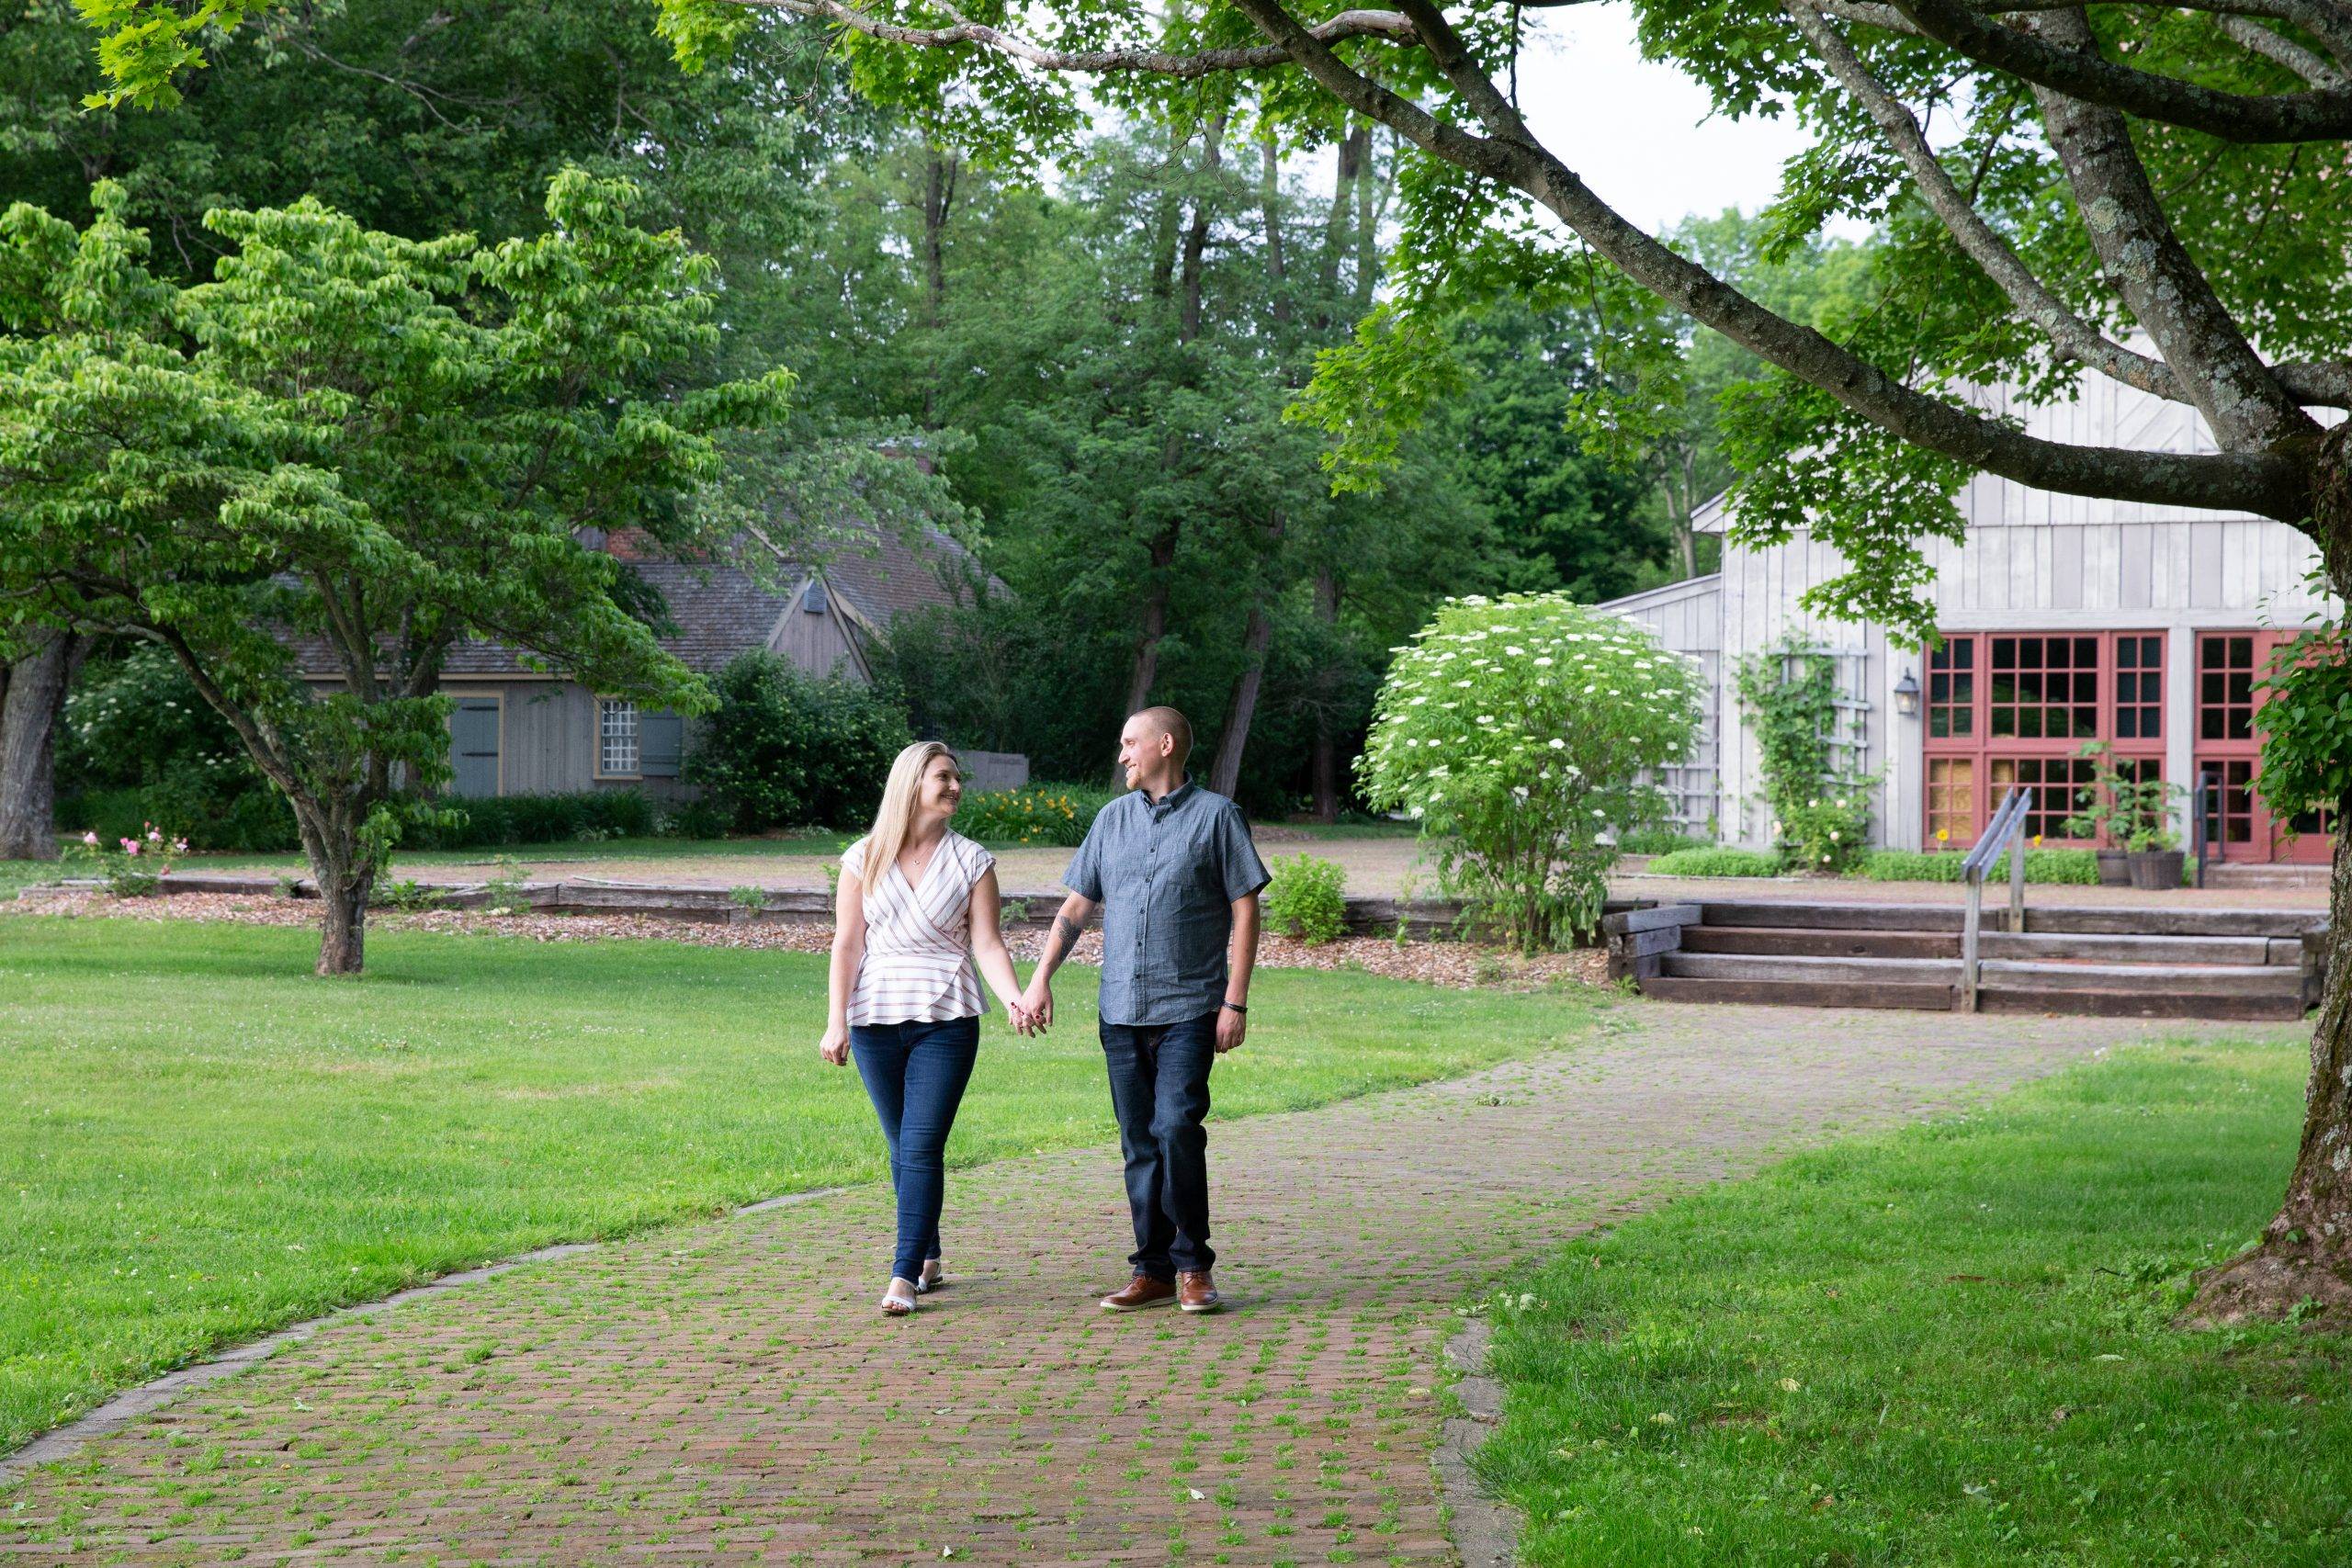 A couple walking down a brick walkway in a park.